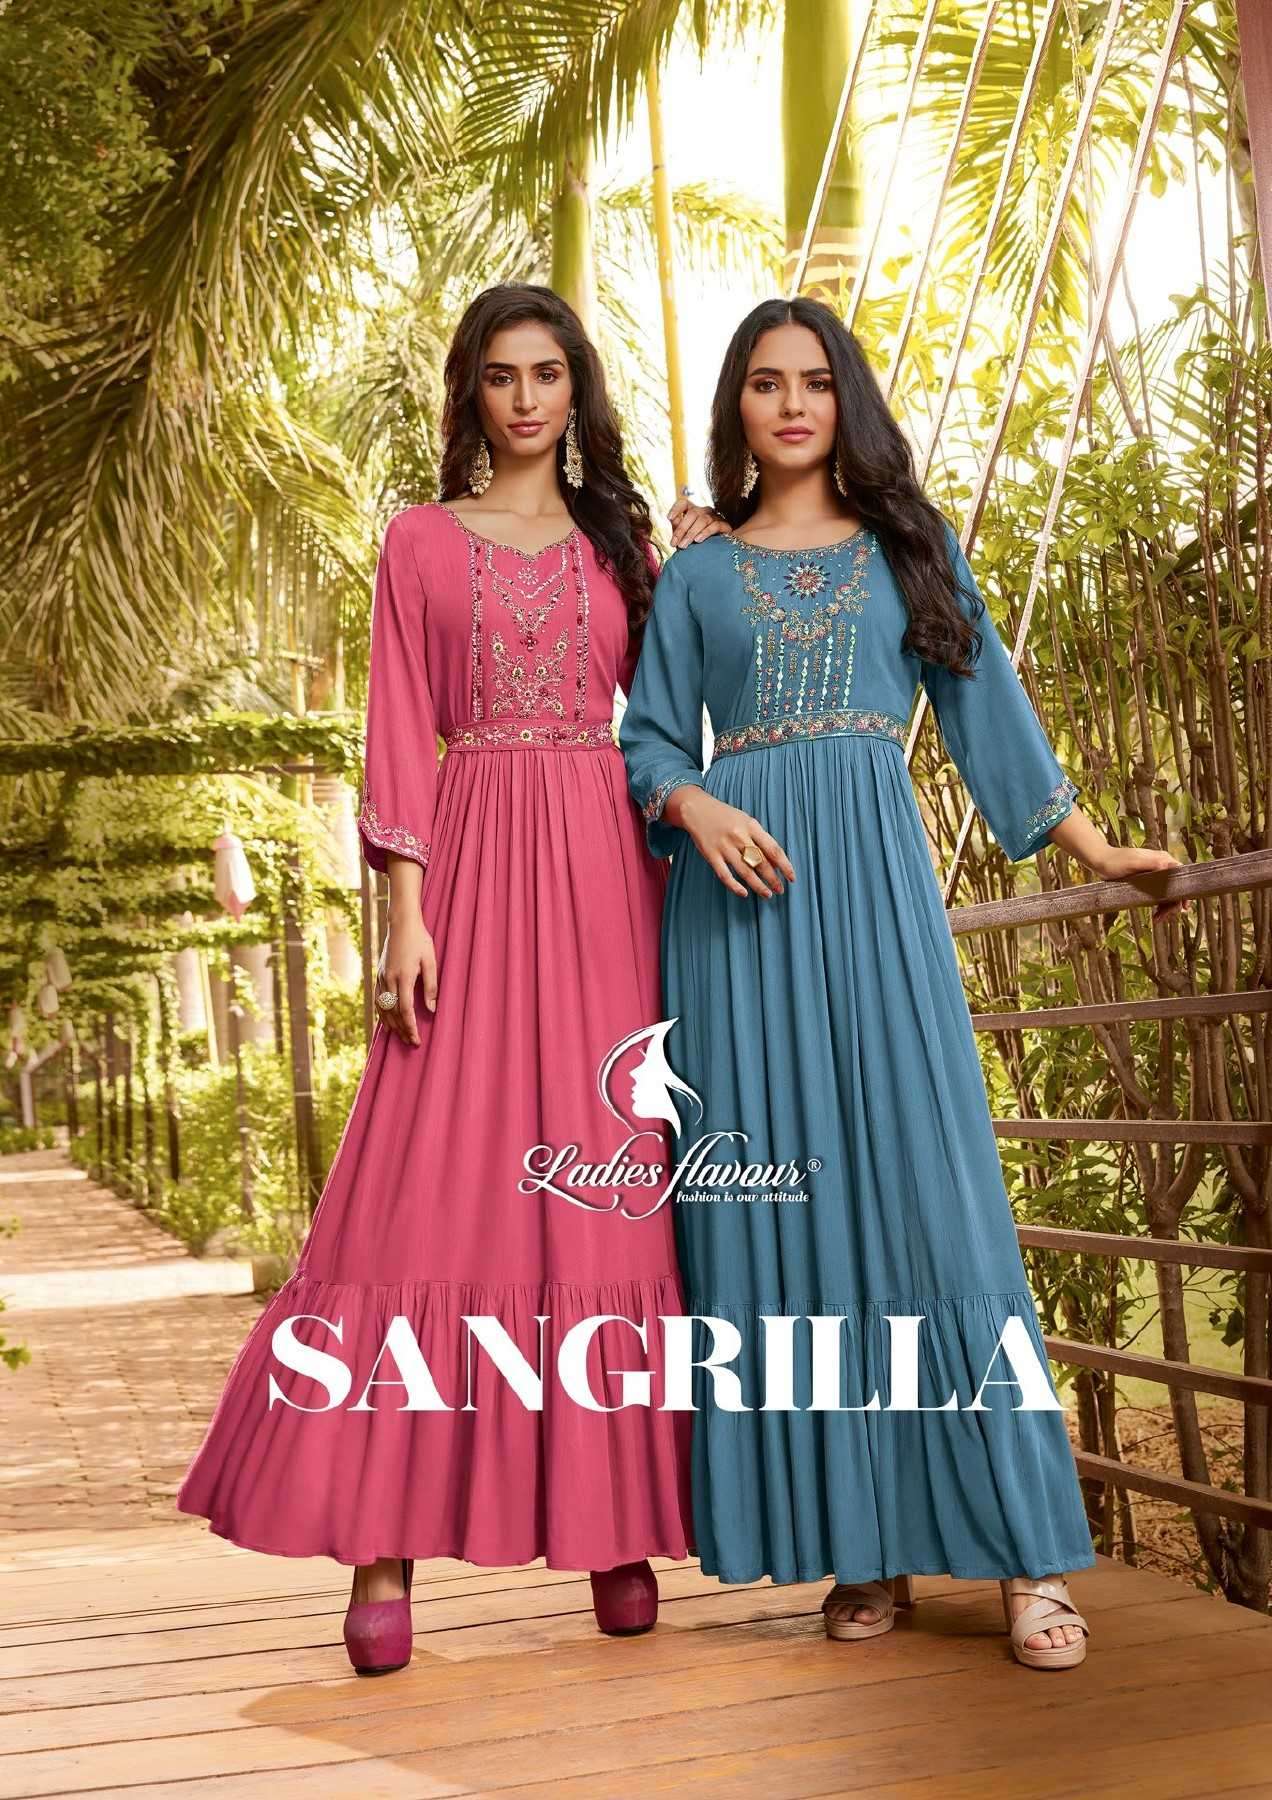 ladies flavour sangrilla heavy rayon long gown